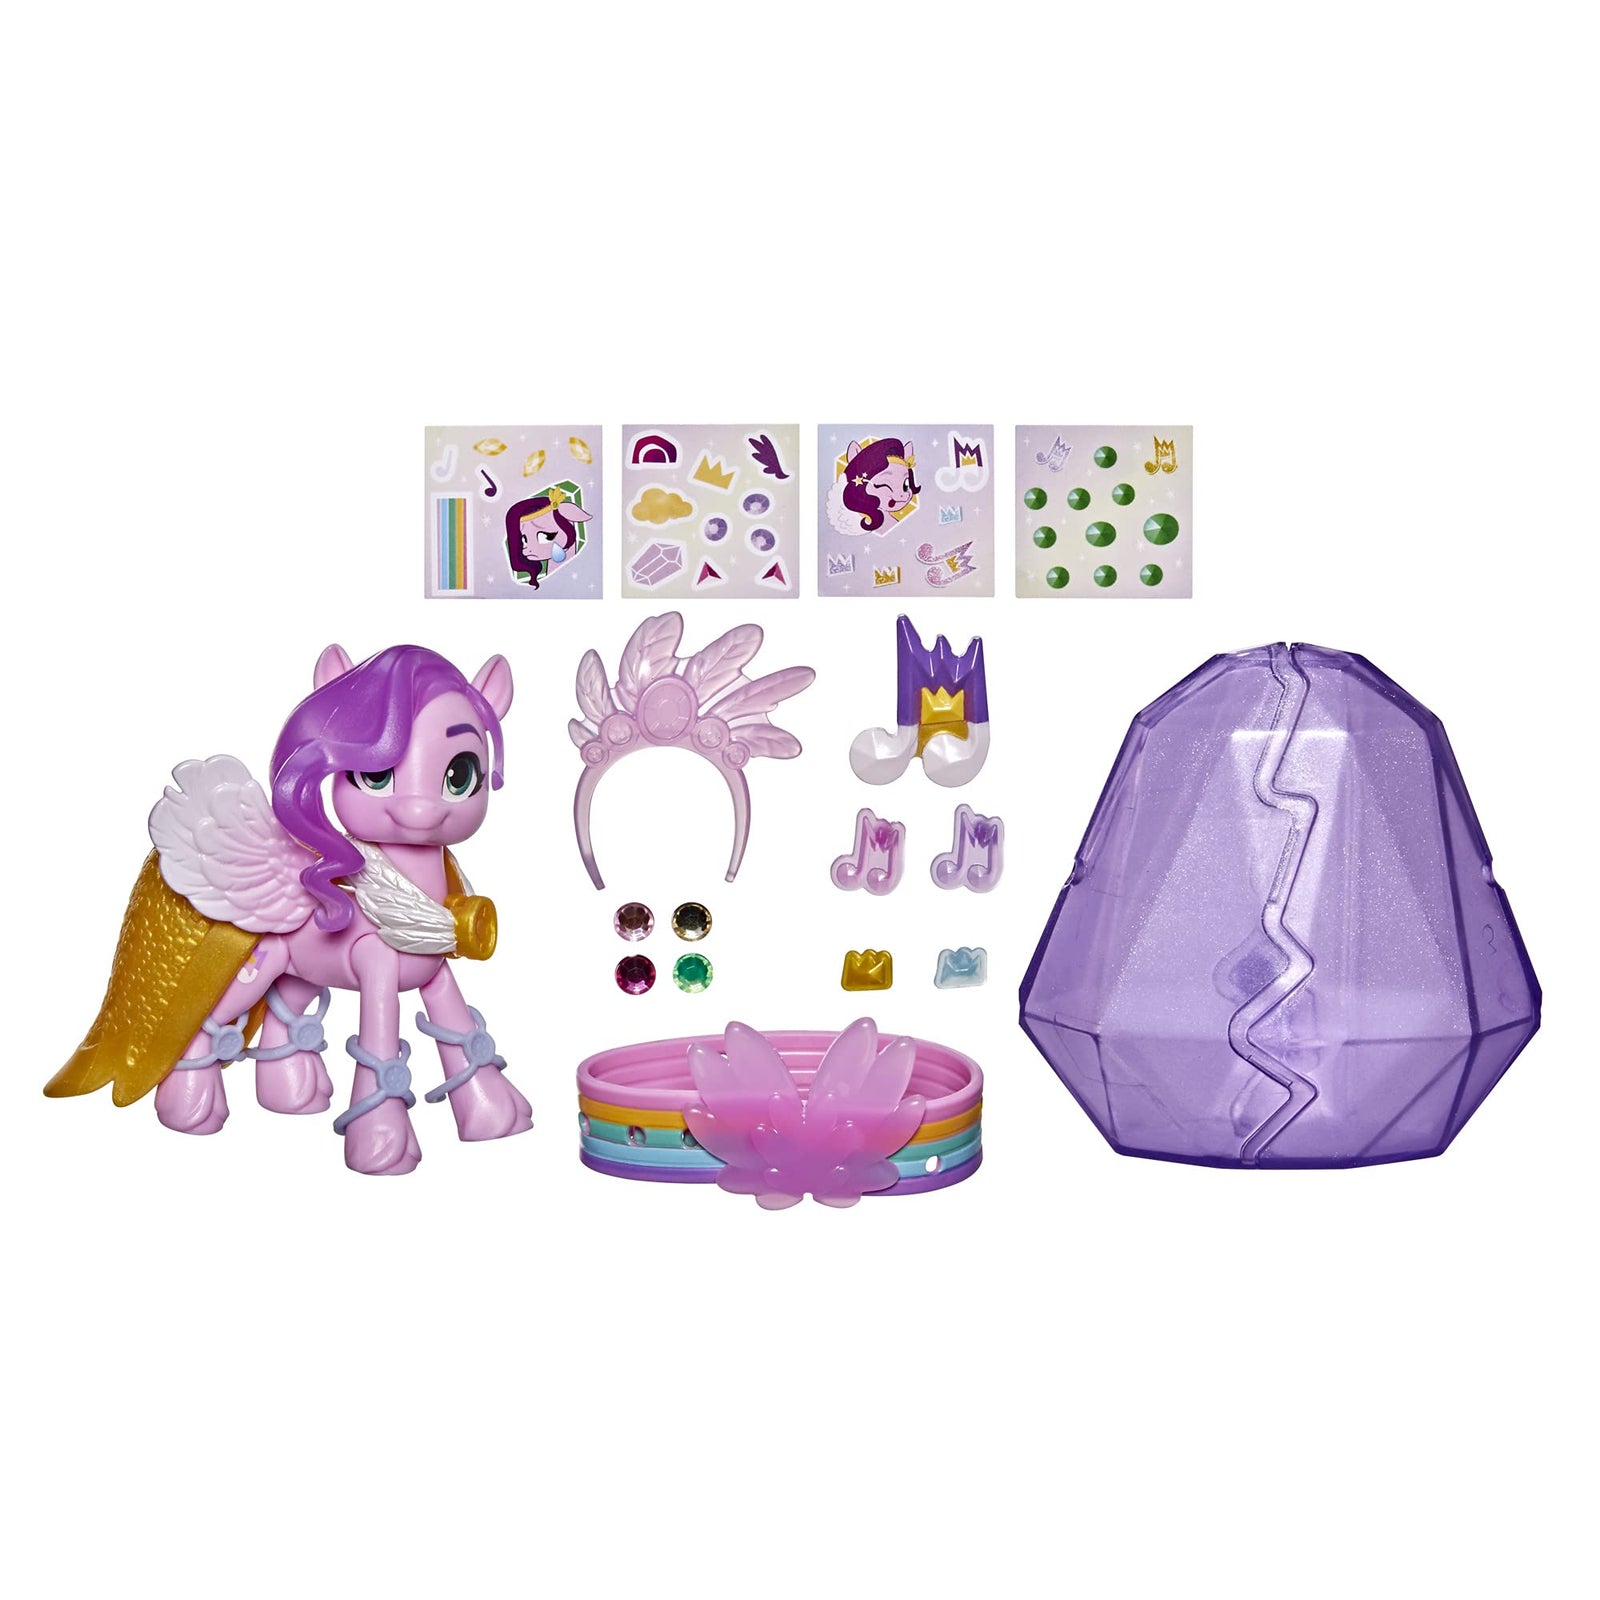 My Little Pony: A New Generation Movie Crystal Adventure Princess Pipp Petals - 3-Inch Pink Pony Toy, Surprise Accessories, Friendship Bracelet